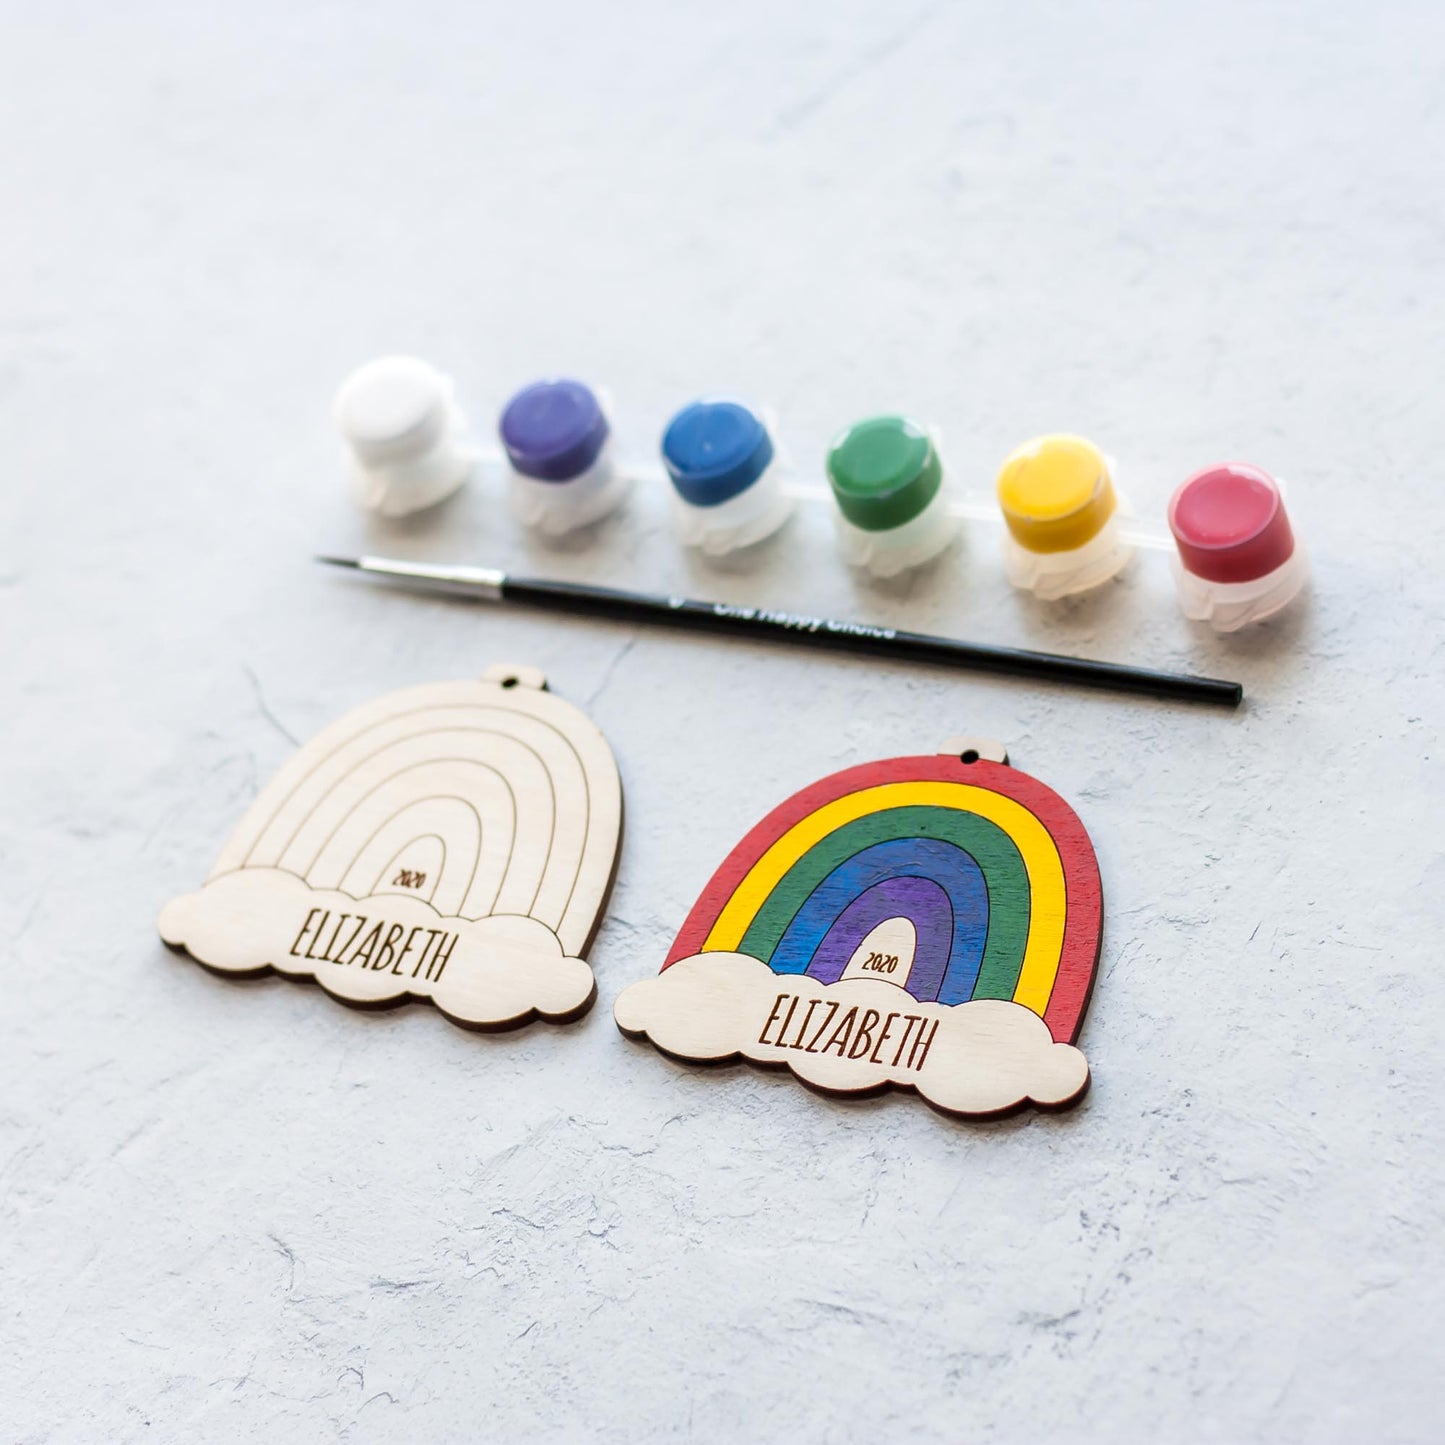 Wooden Ornament Paint Kits: Rainbows Engraved and Laser Cut in Birch Plywood with 6 primary paint colors included by LeeMo Designs in Bend, Oregon